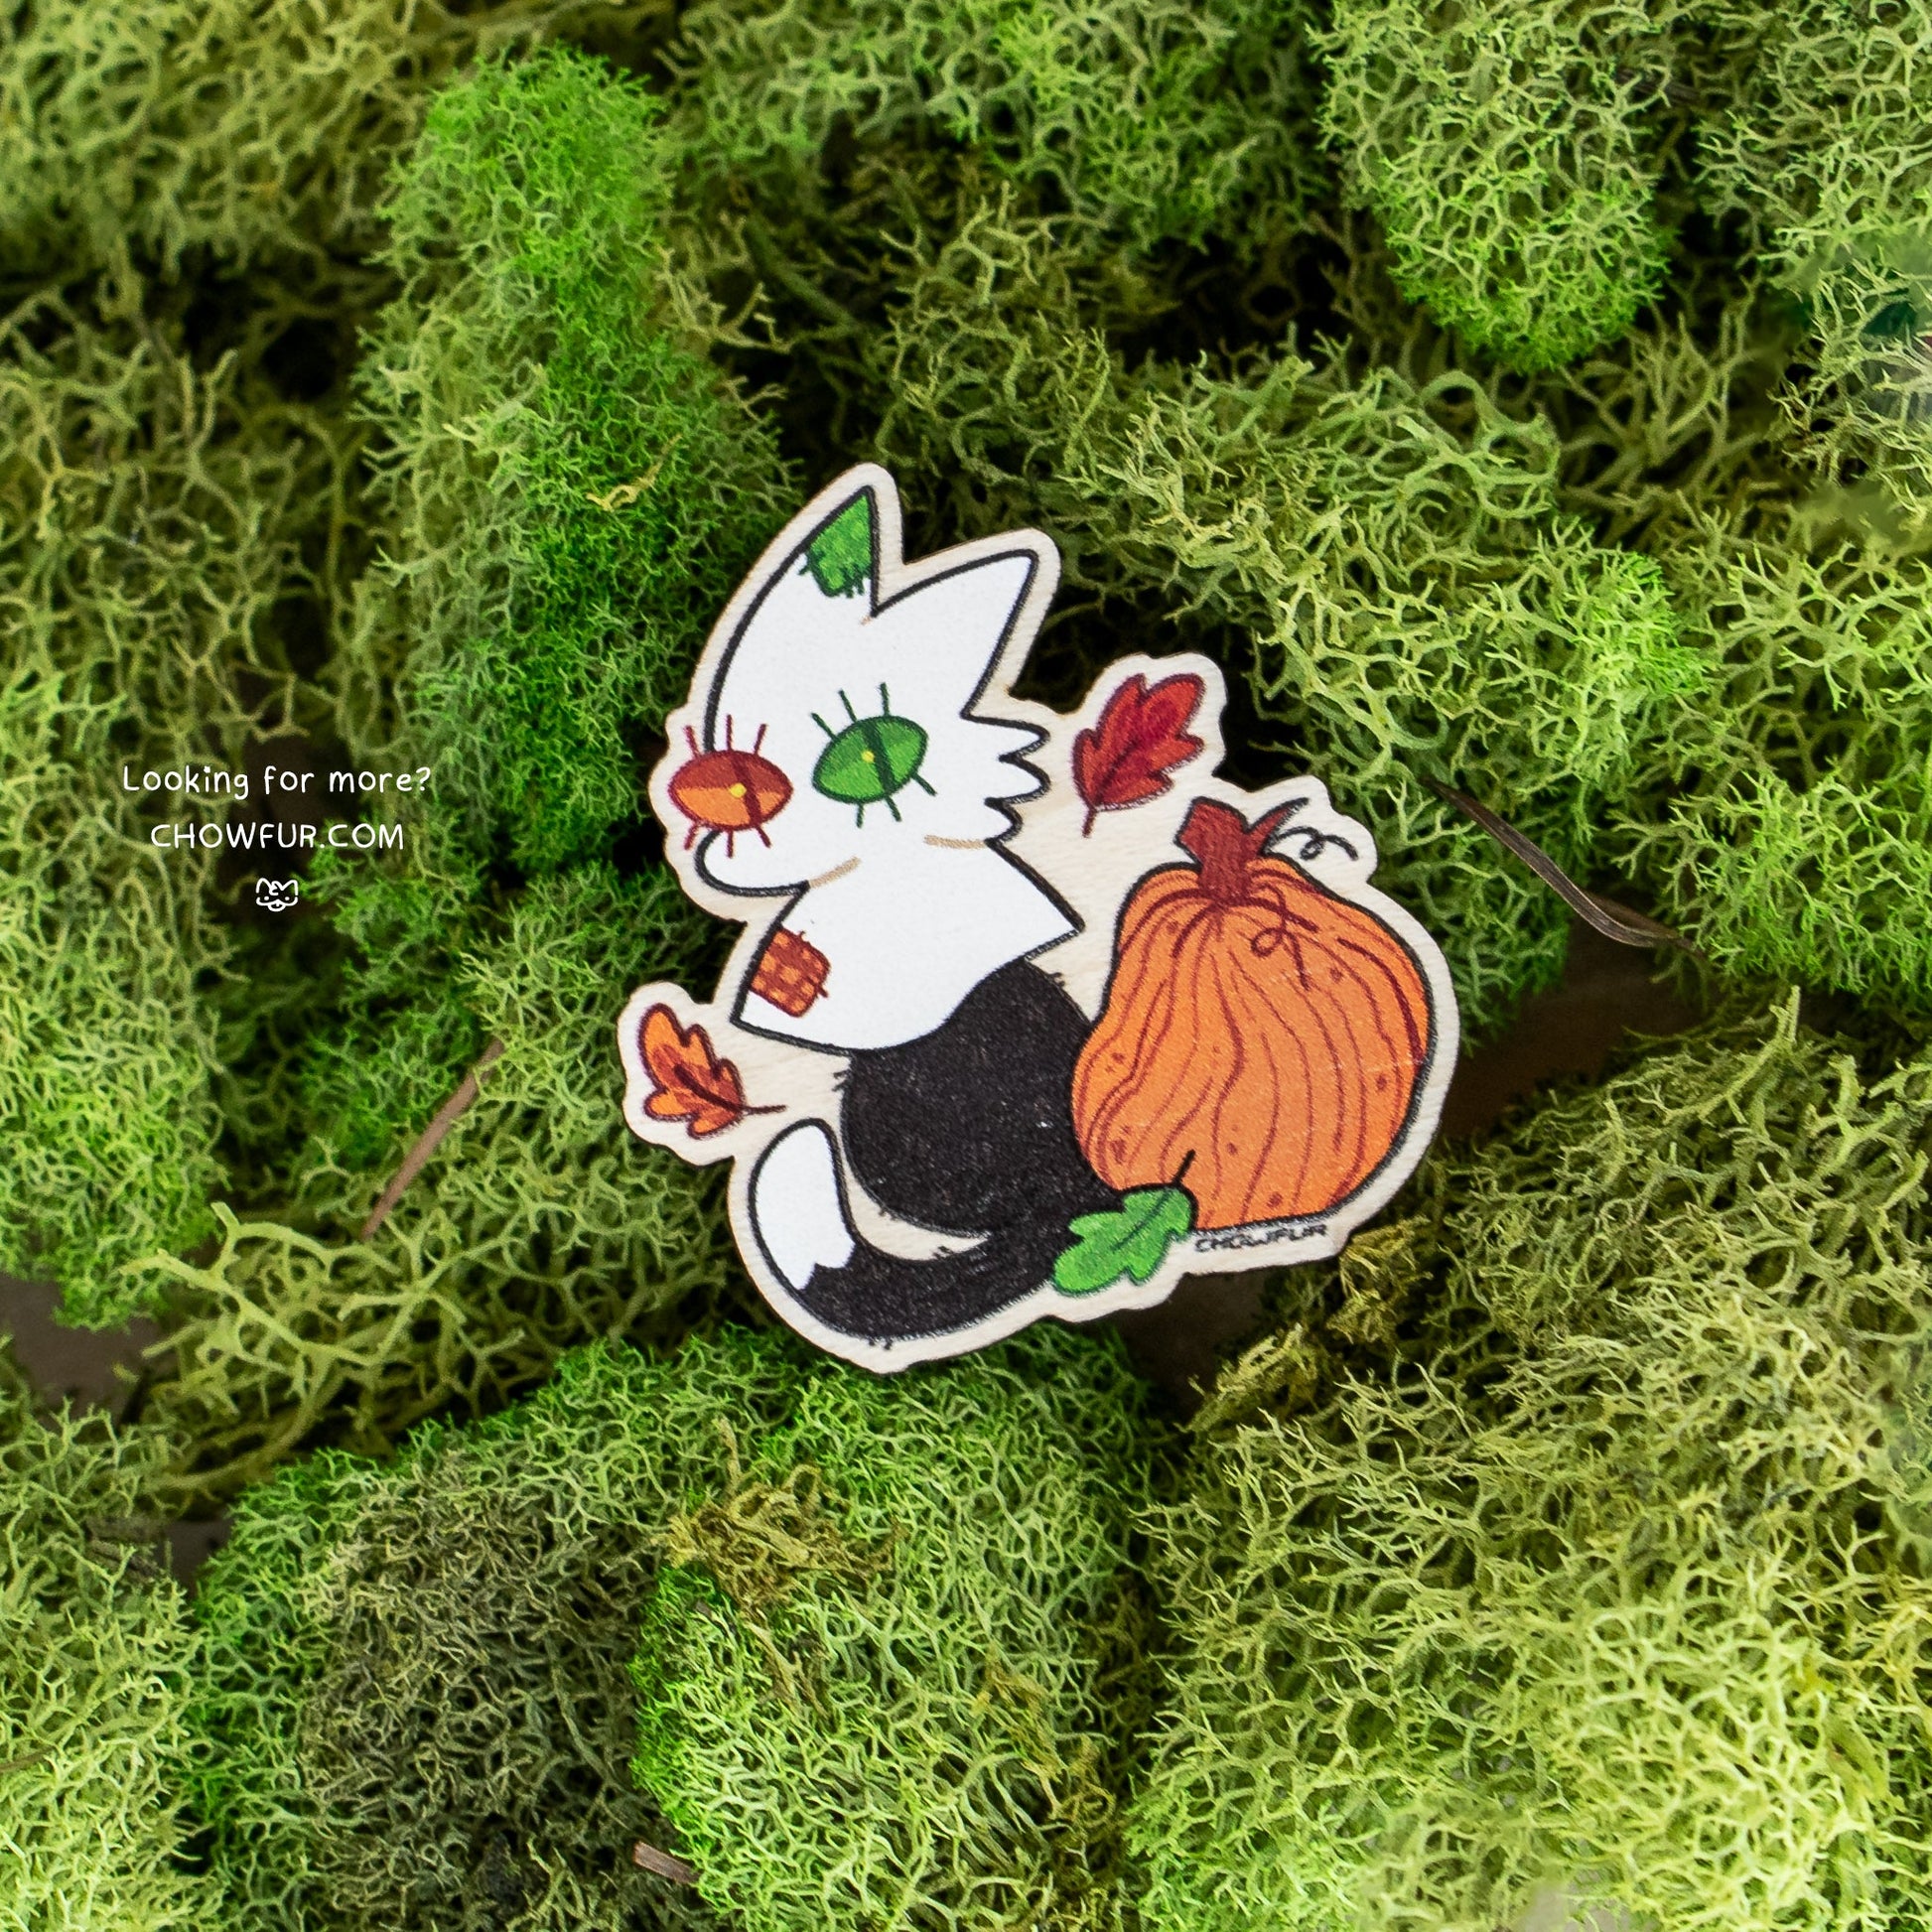 Flyn Ghost Cat Wooden Pin - $5 - Furry Wooden Pin only from Chowfur.com -  Shop now!